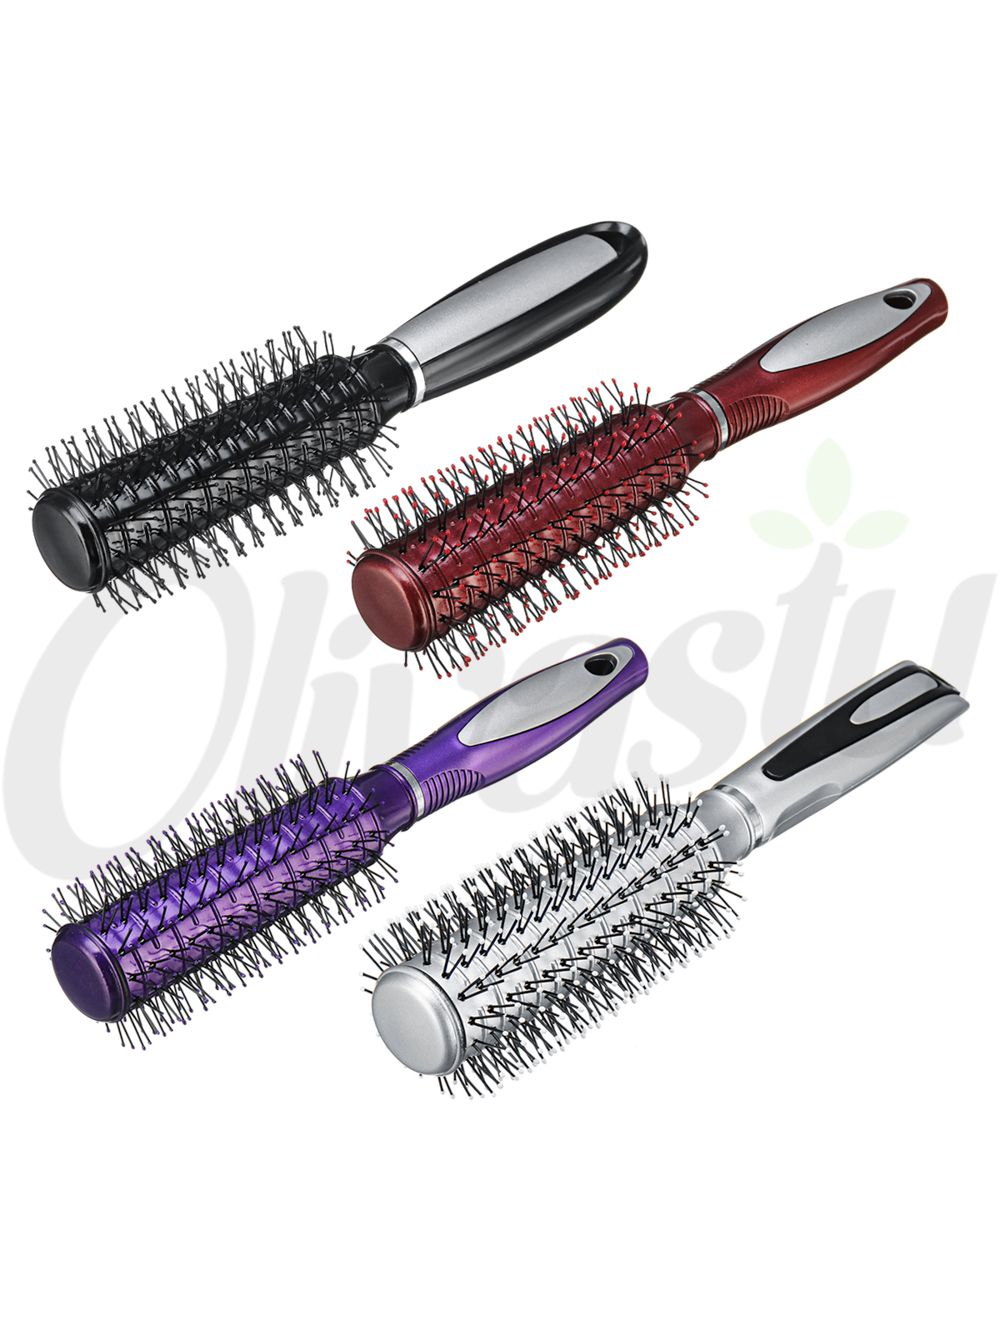 Stash Away Your Valuables Diversion Safe Security Safe Hairbrush 